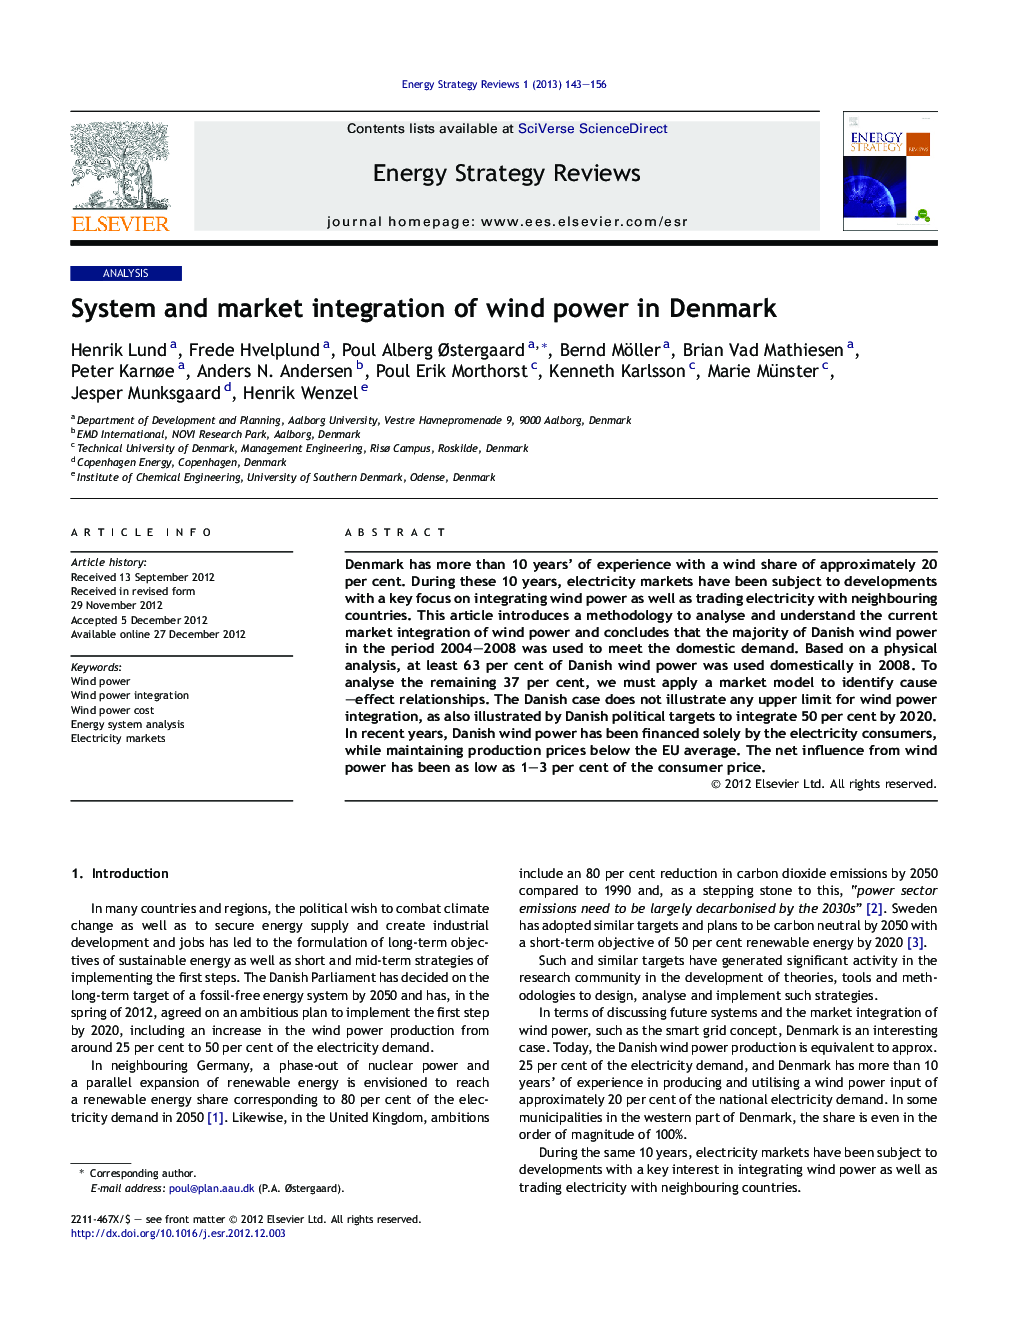 System and market integration of wind power in Denmark